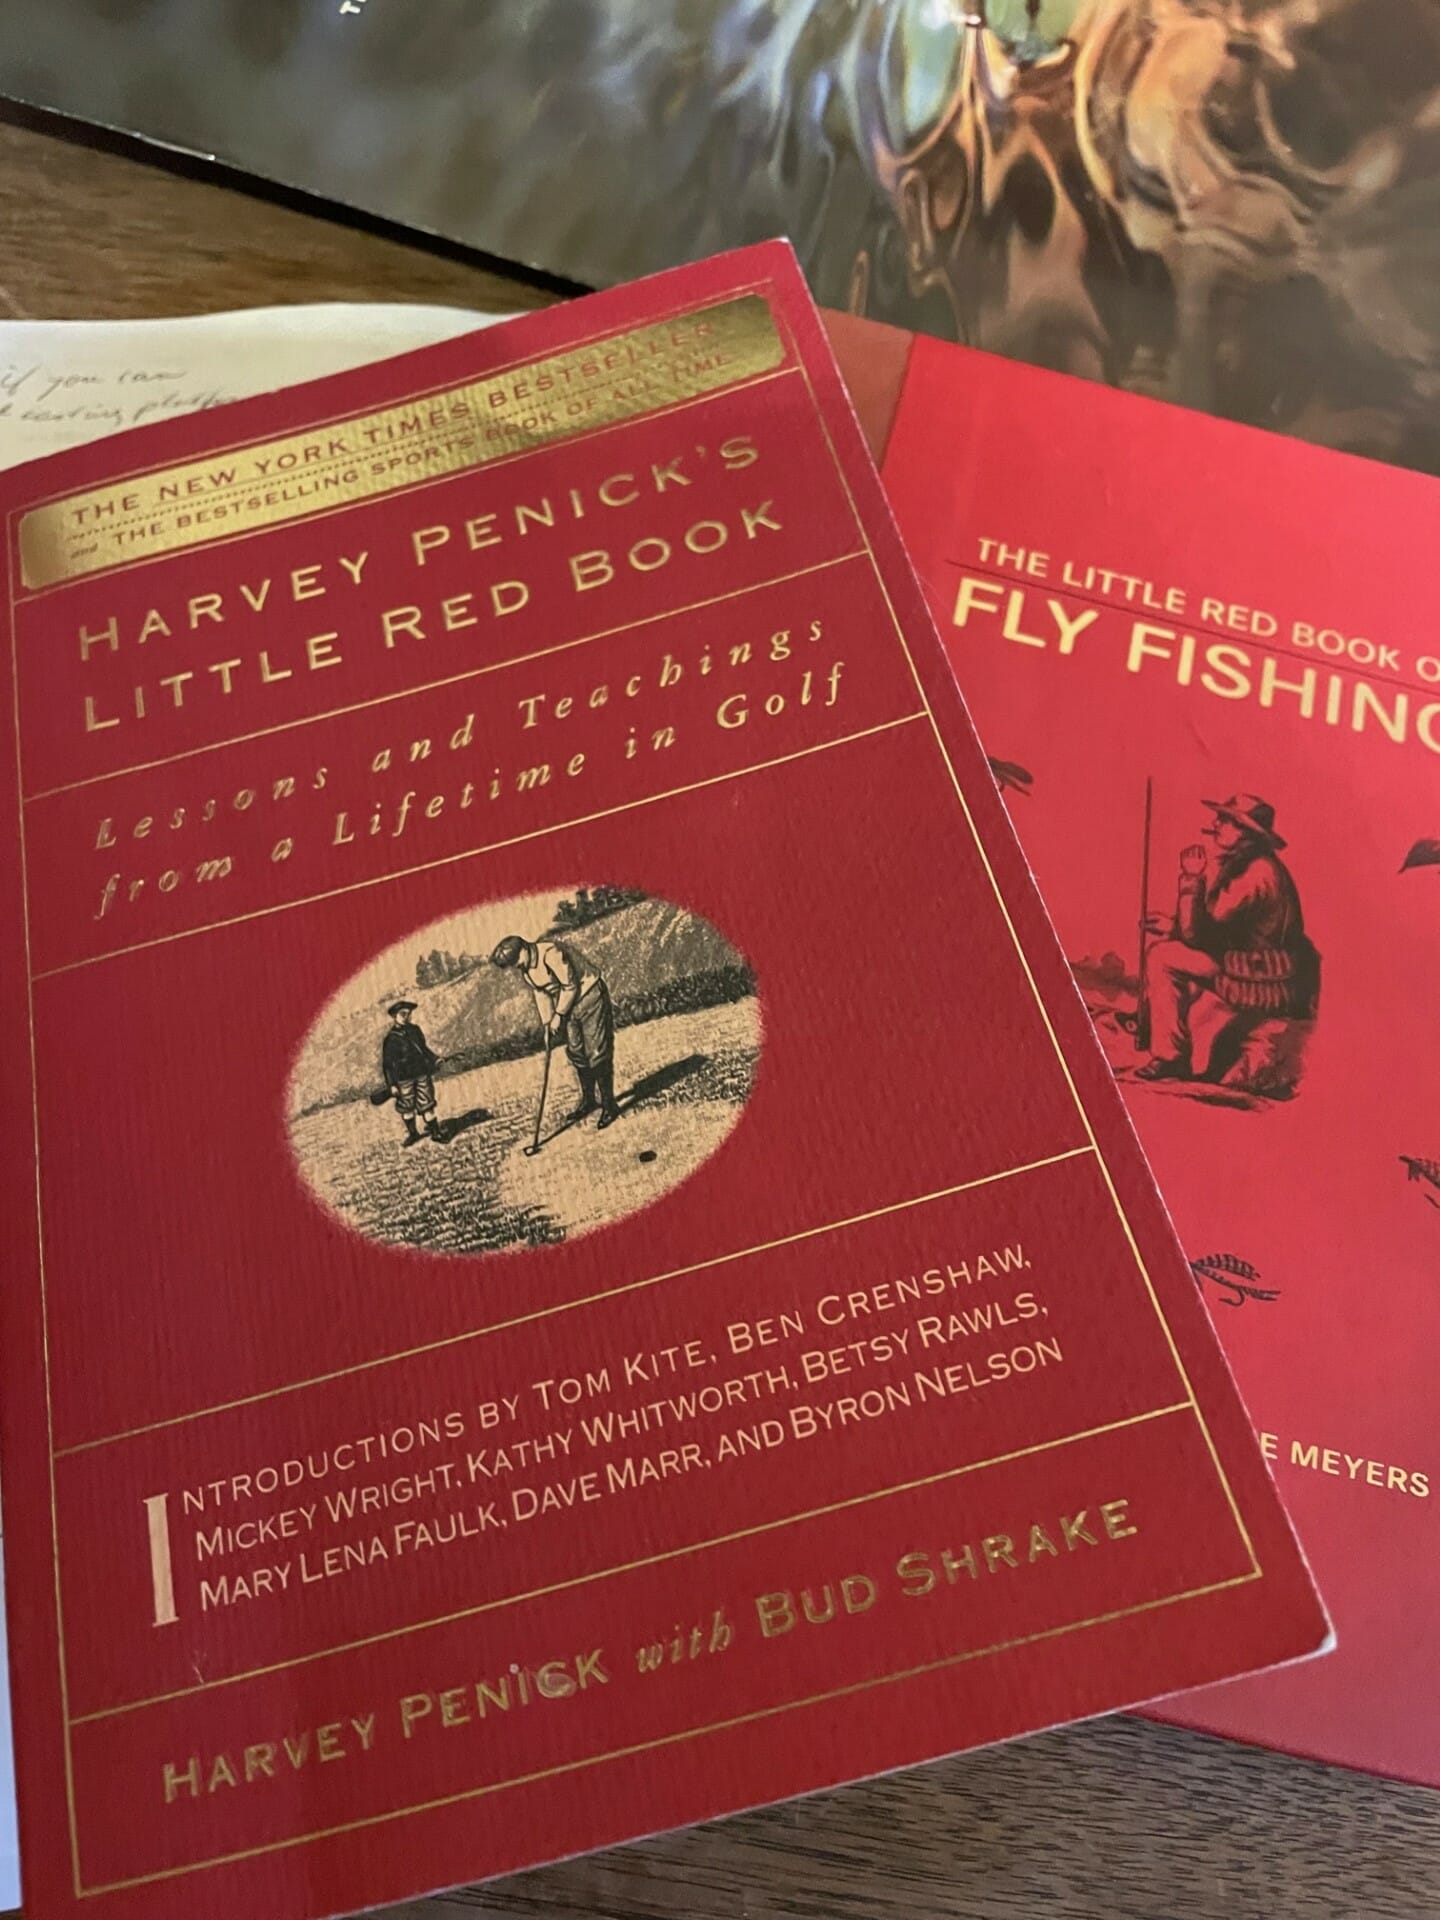 The red covers of two books about golf and fly fishing